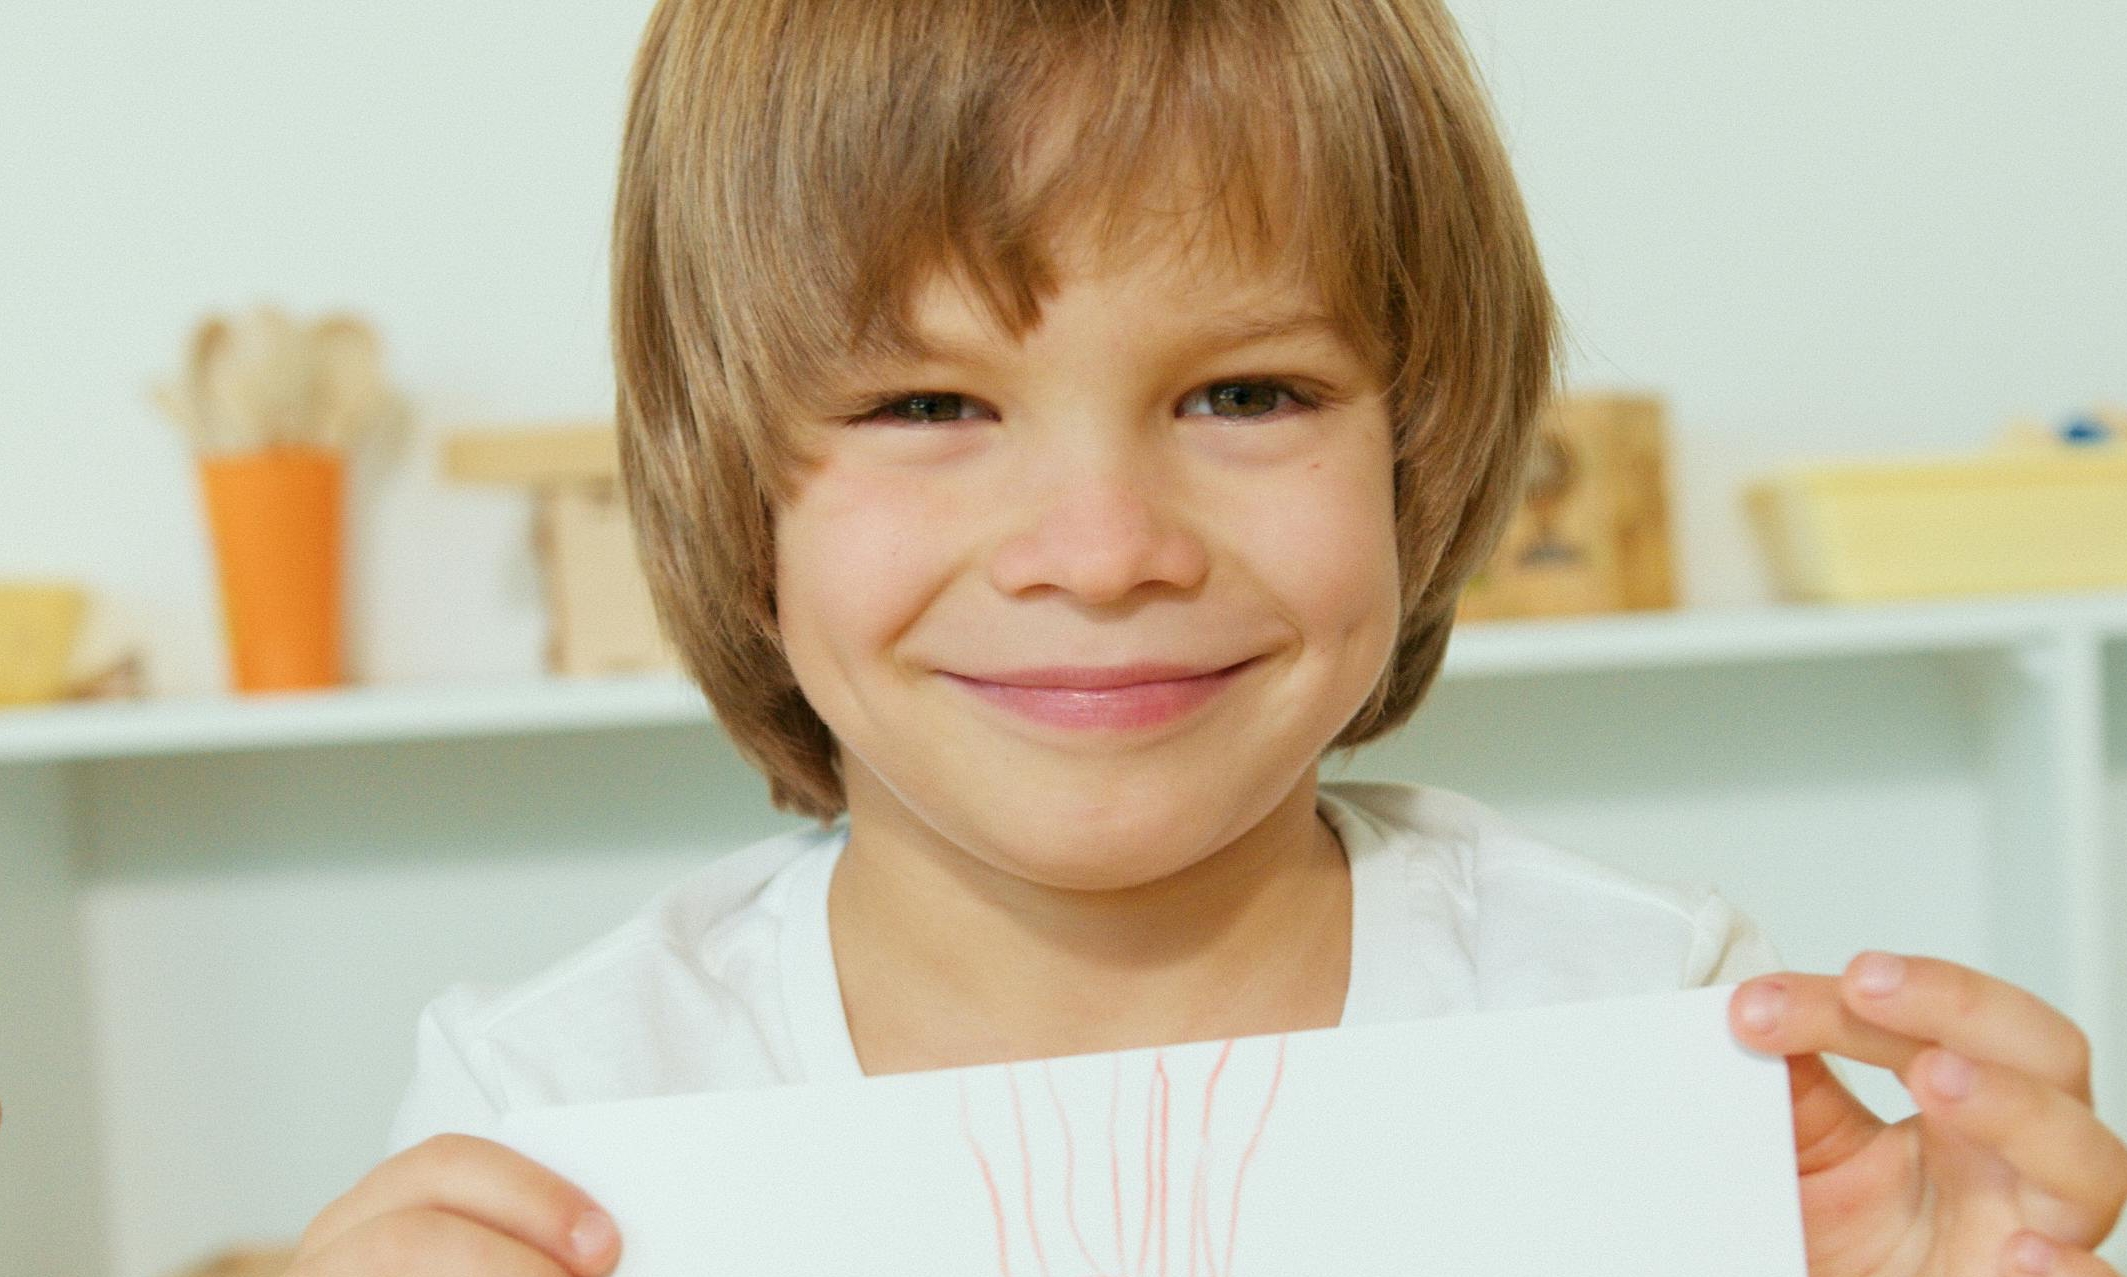 A smiling boy holds up a drawing | Source: Pexels